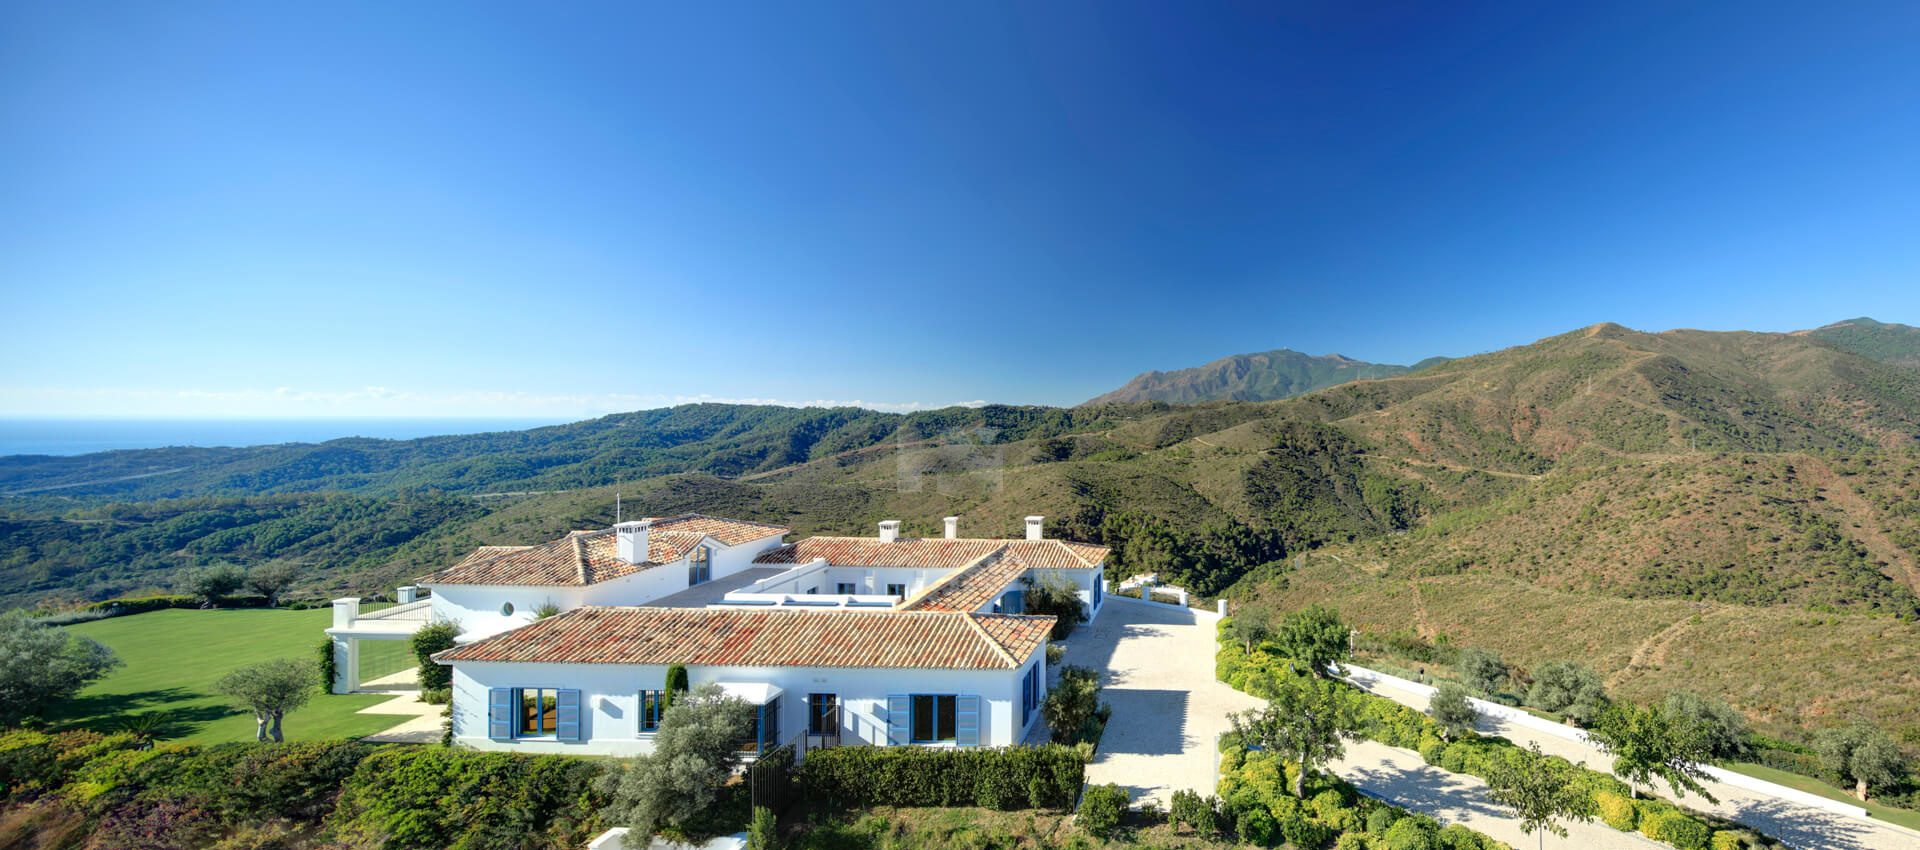 A luxurious villa on a double plot with panoramic views to the Mediterranean and the mountains